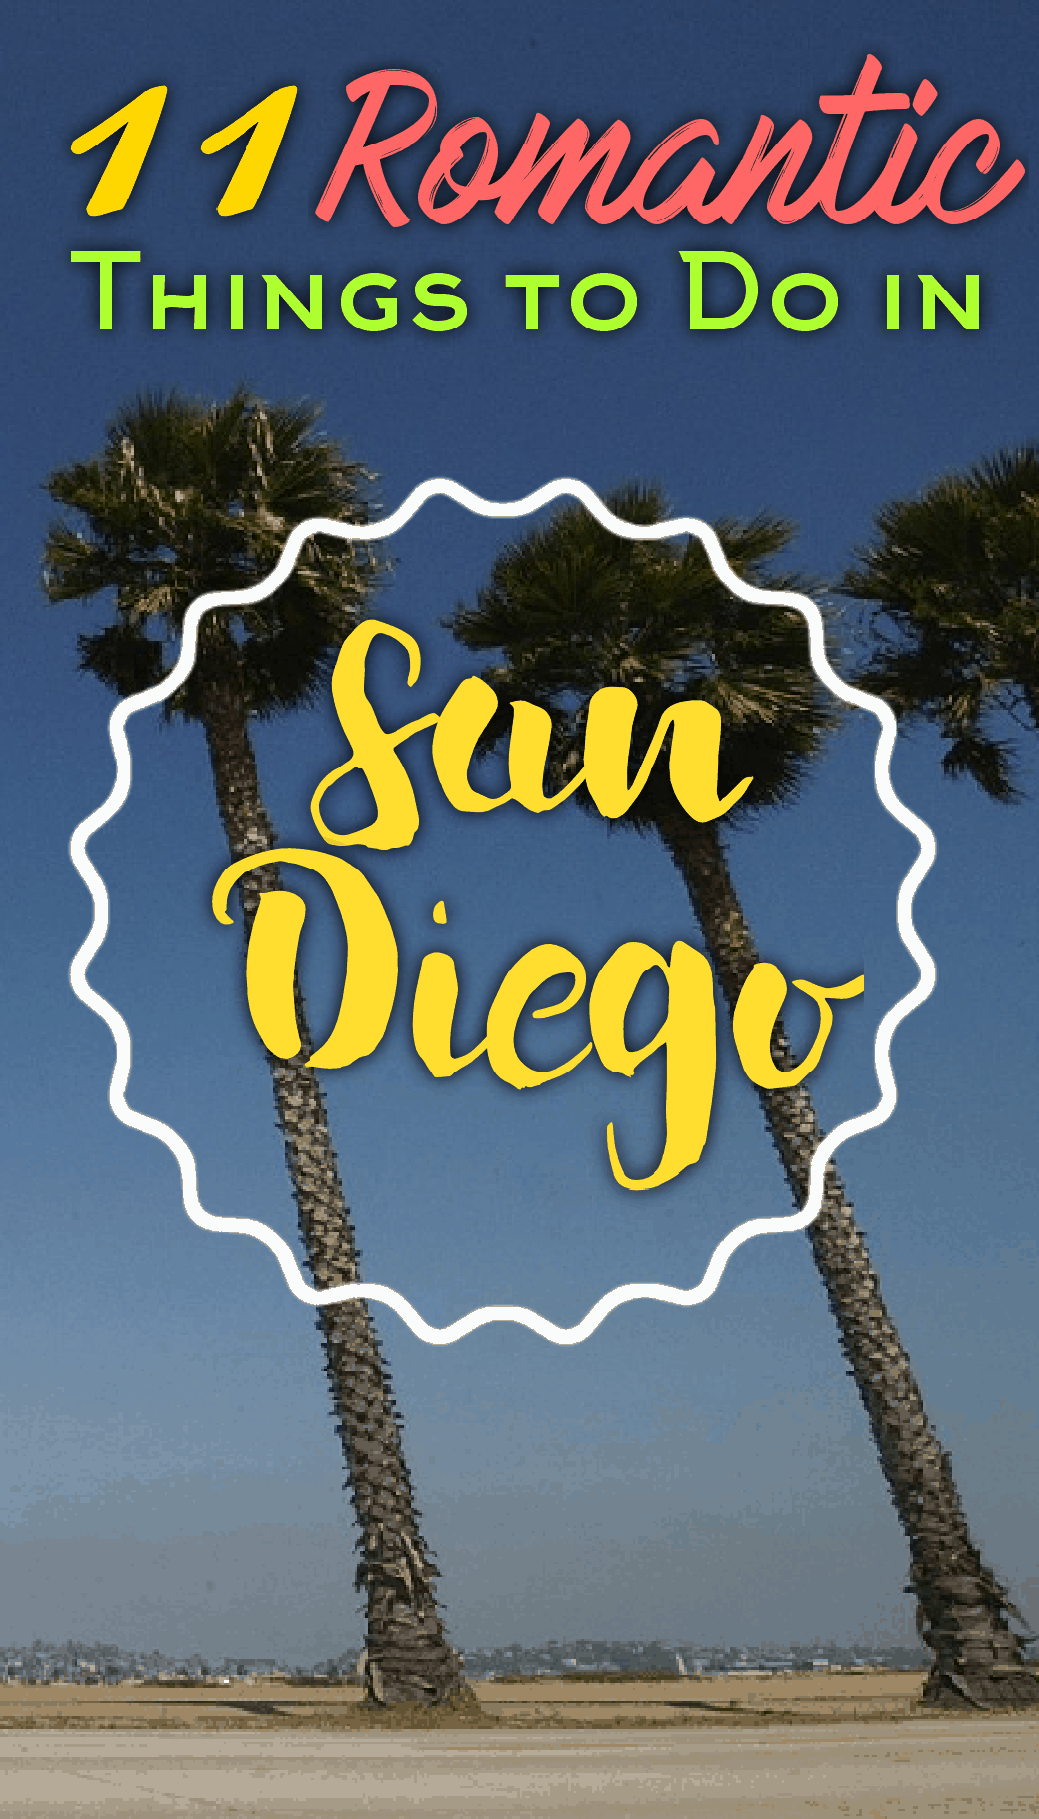 Pinterest social image that says “11 romantic things to do in San Diego.”